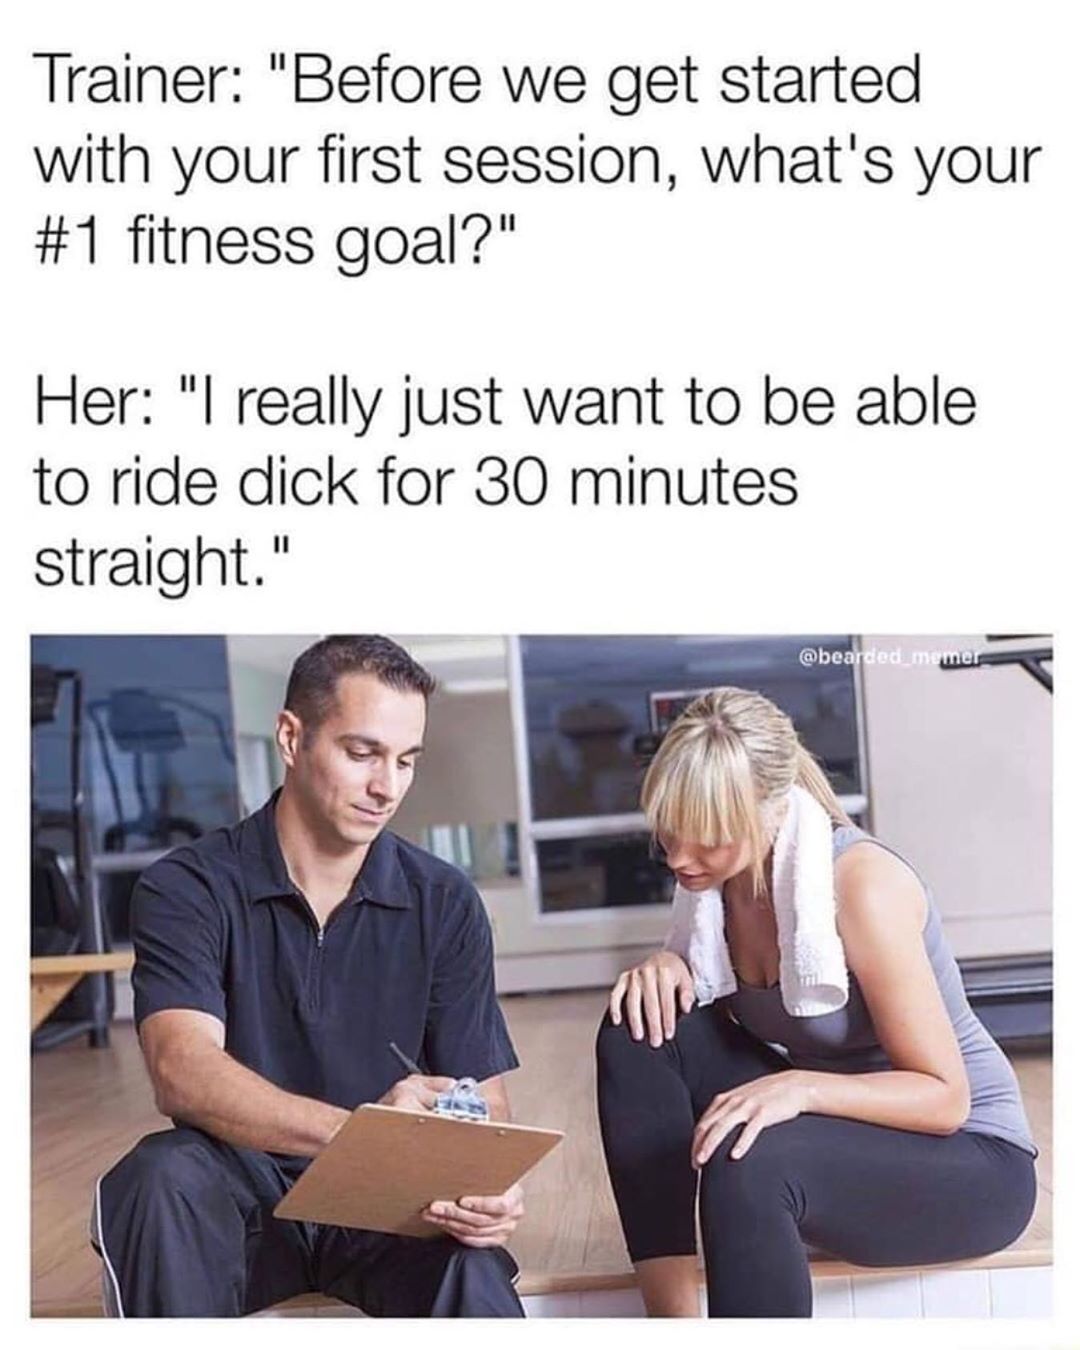 Goal - Trainer "Before we get started with your first session, what's your fitness goal?" Her "I really just want to be able to ride dick for 30 minutes straight." memer